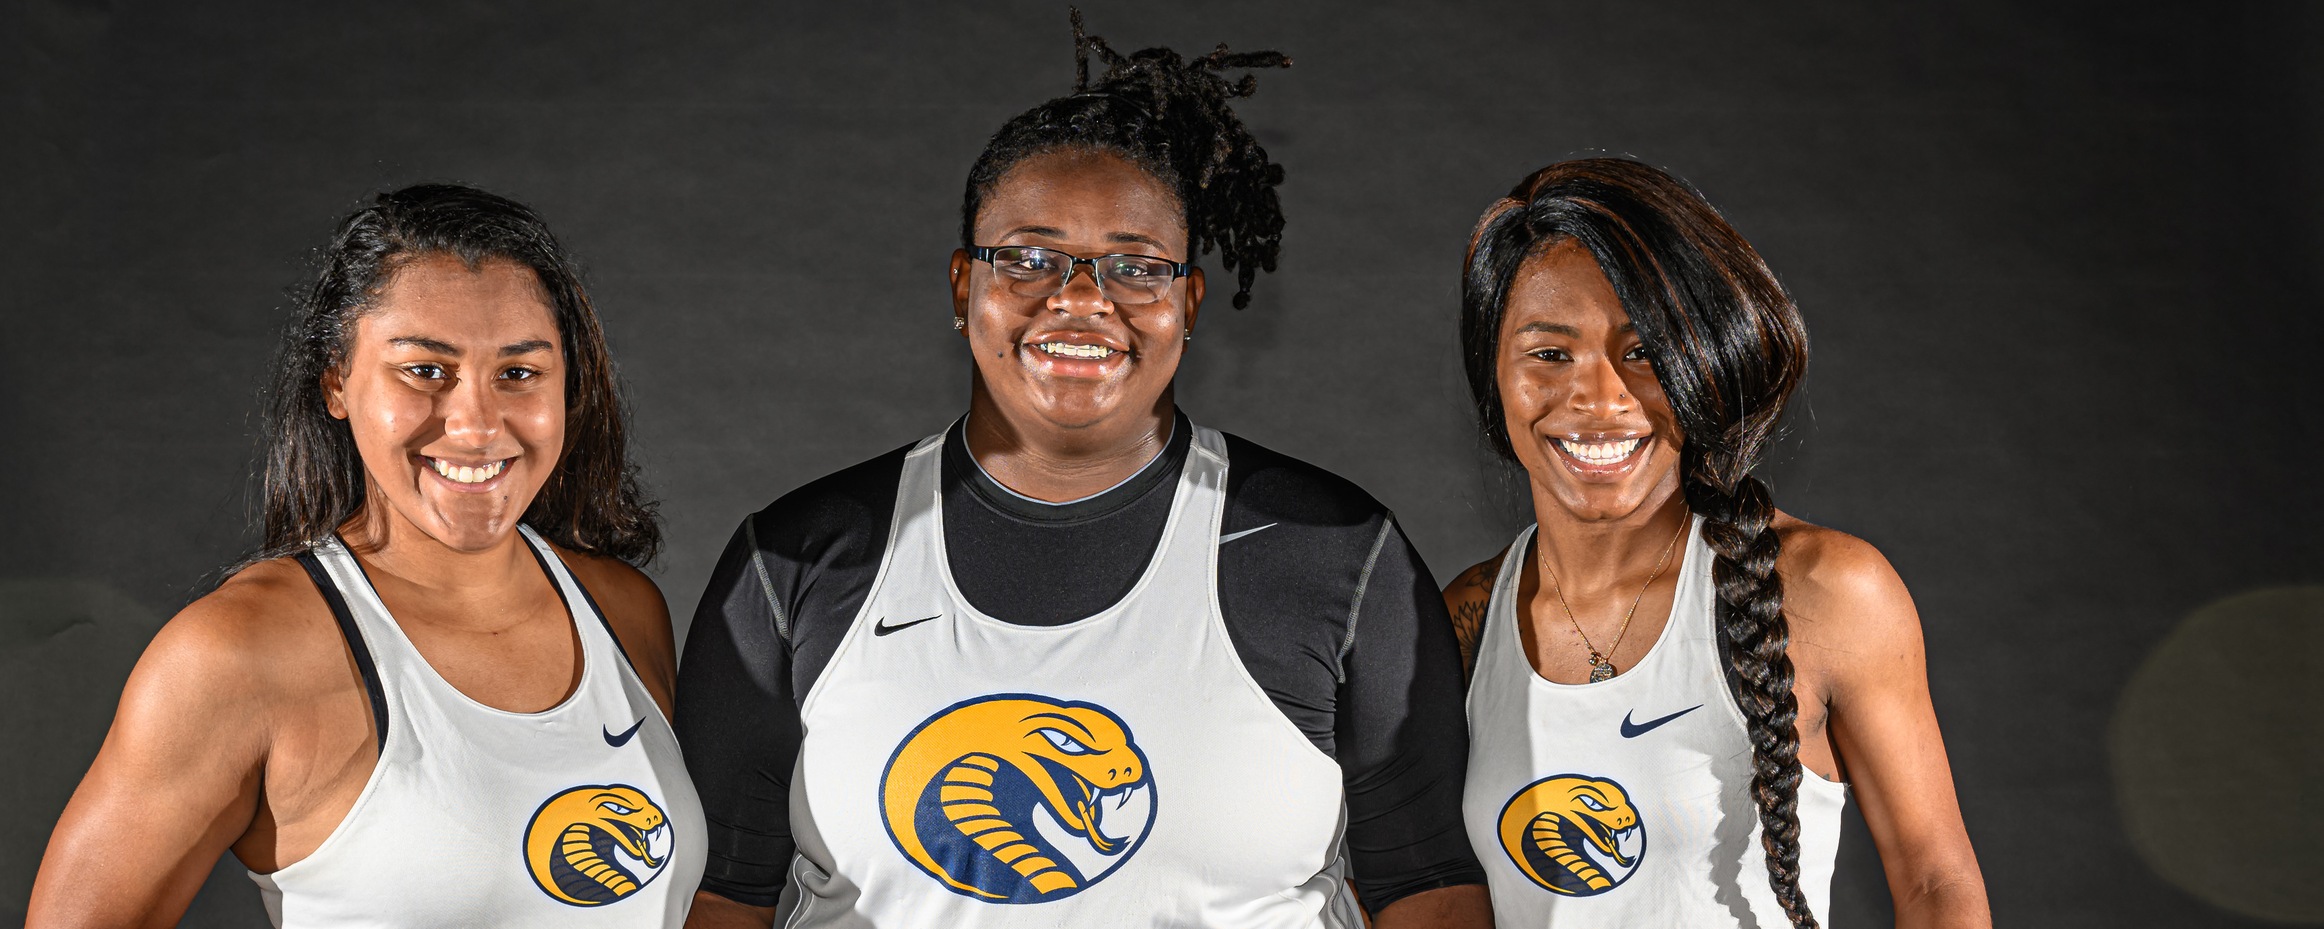 Tiffany Taylor and Calene Lazare set Coker records at JDL College Kick-Off Classic